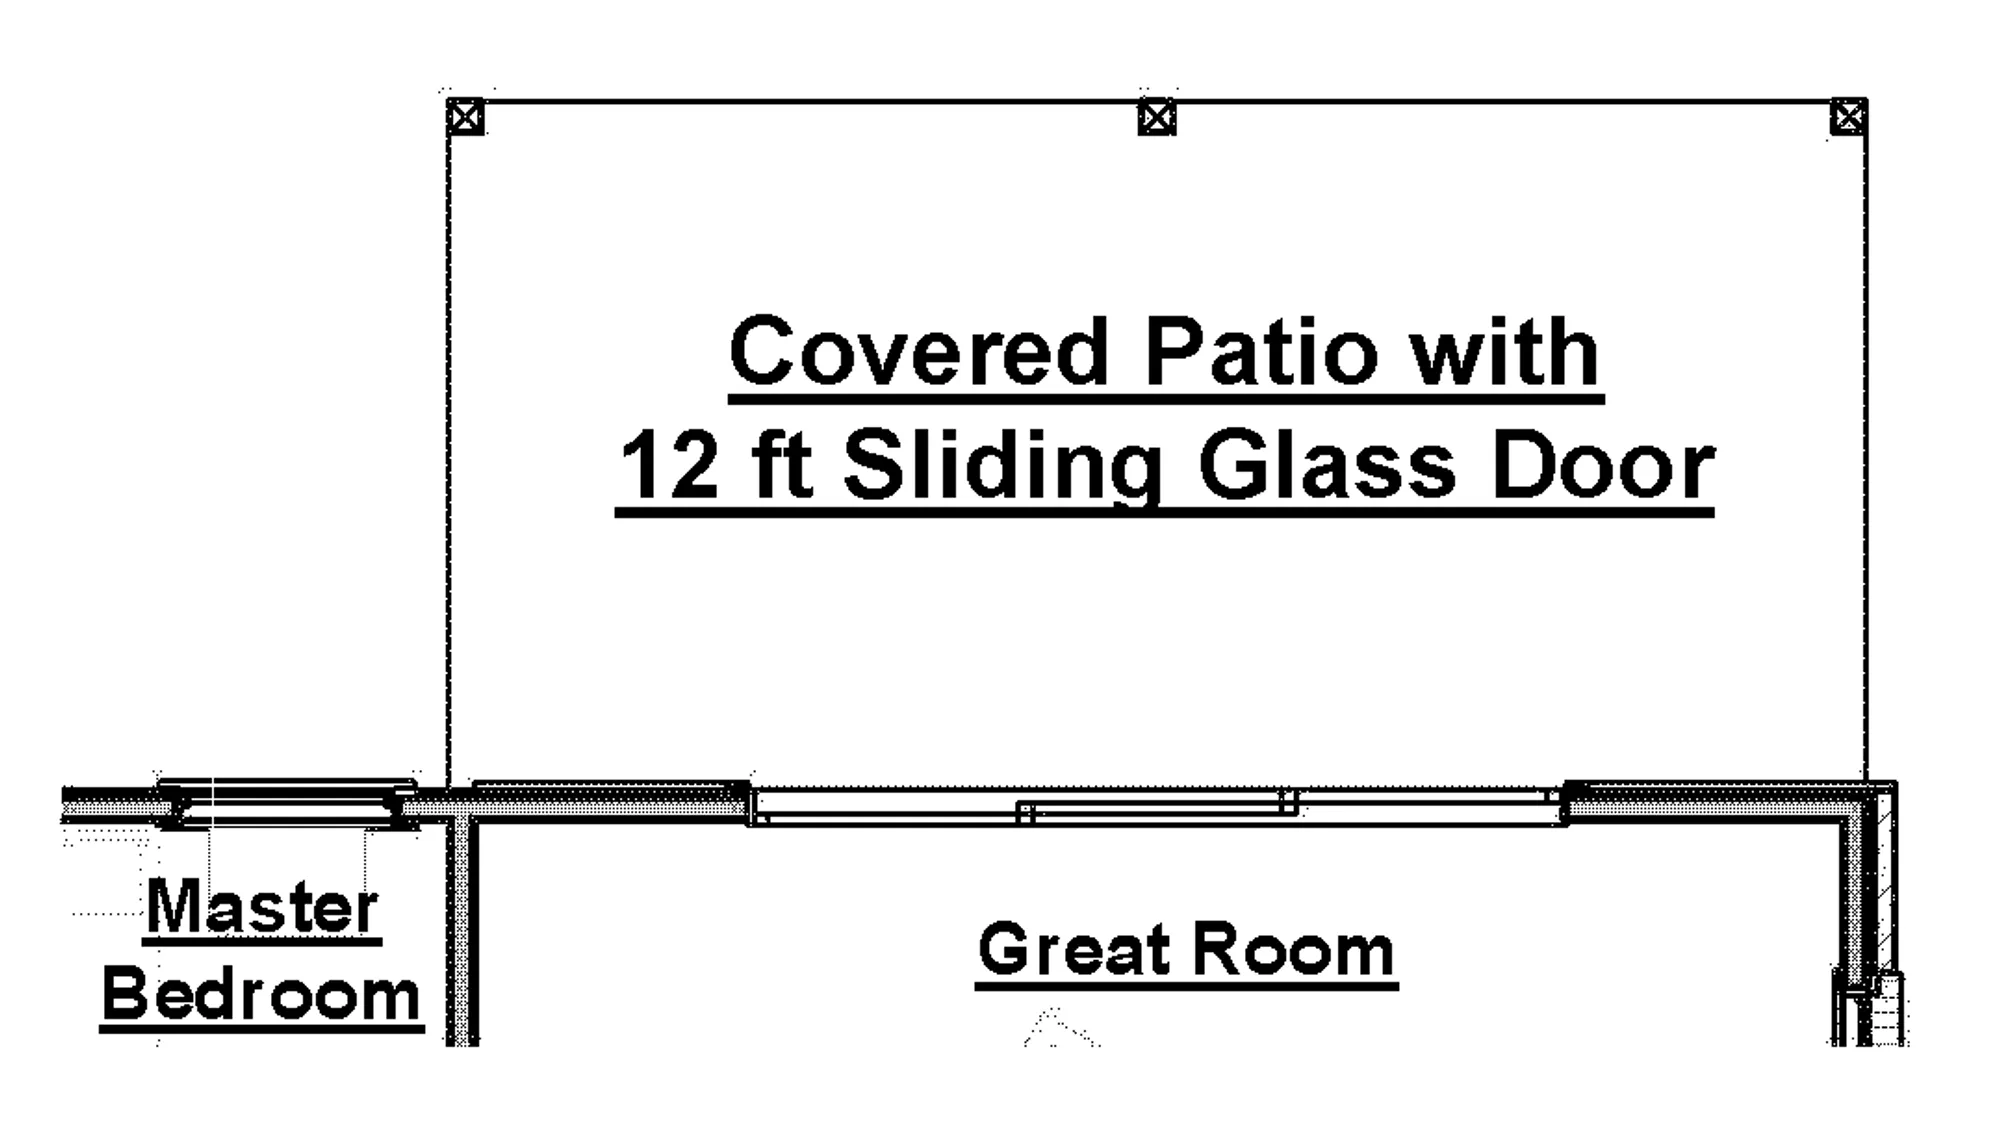 Covered Patio with 12ft Sliding Glass Door - undefined